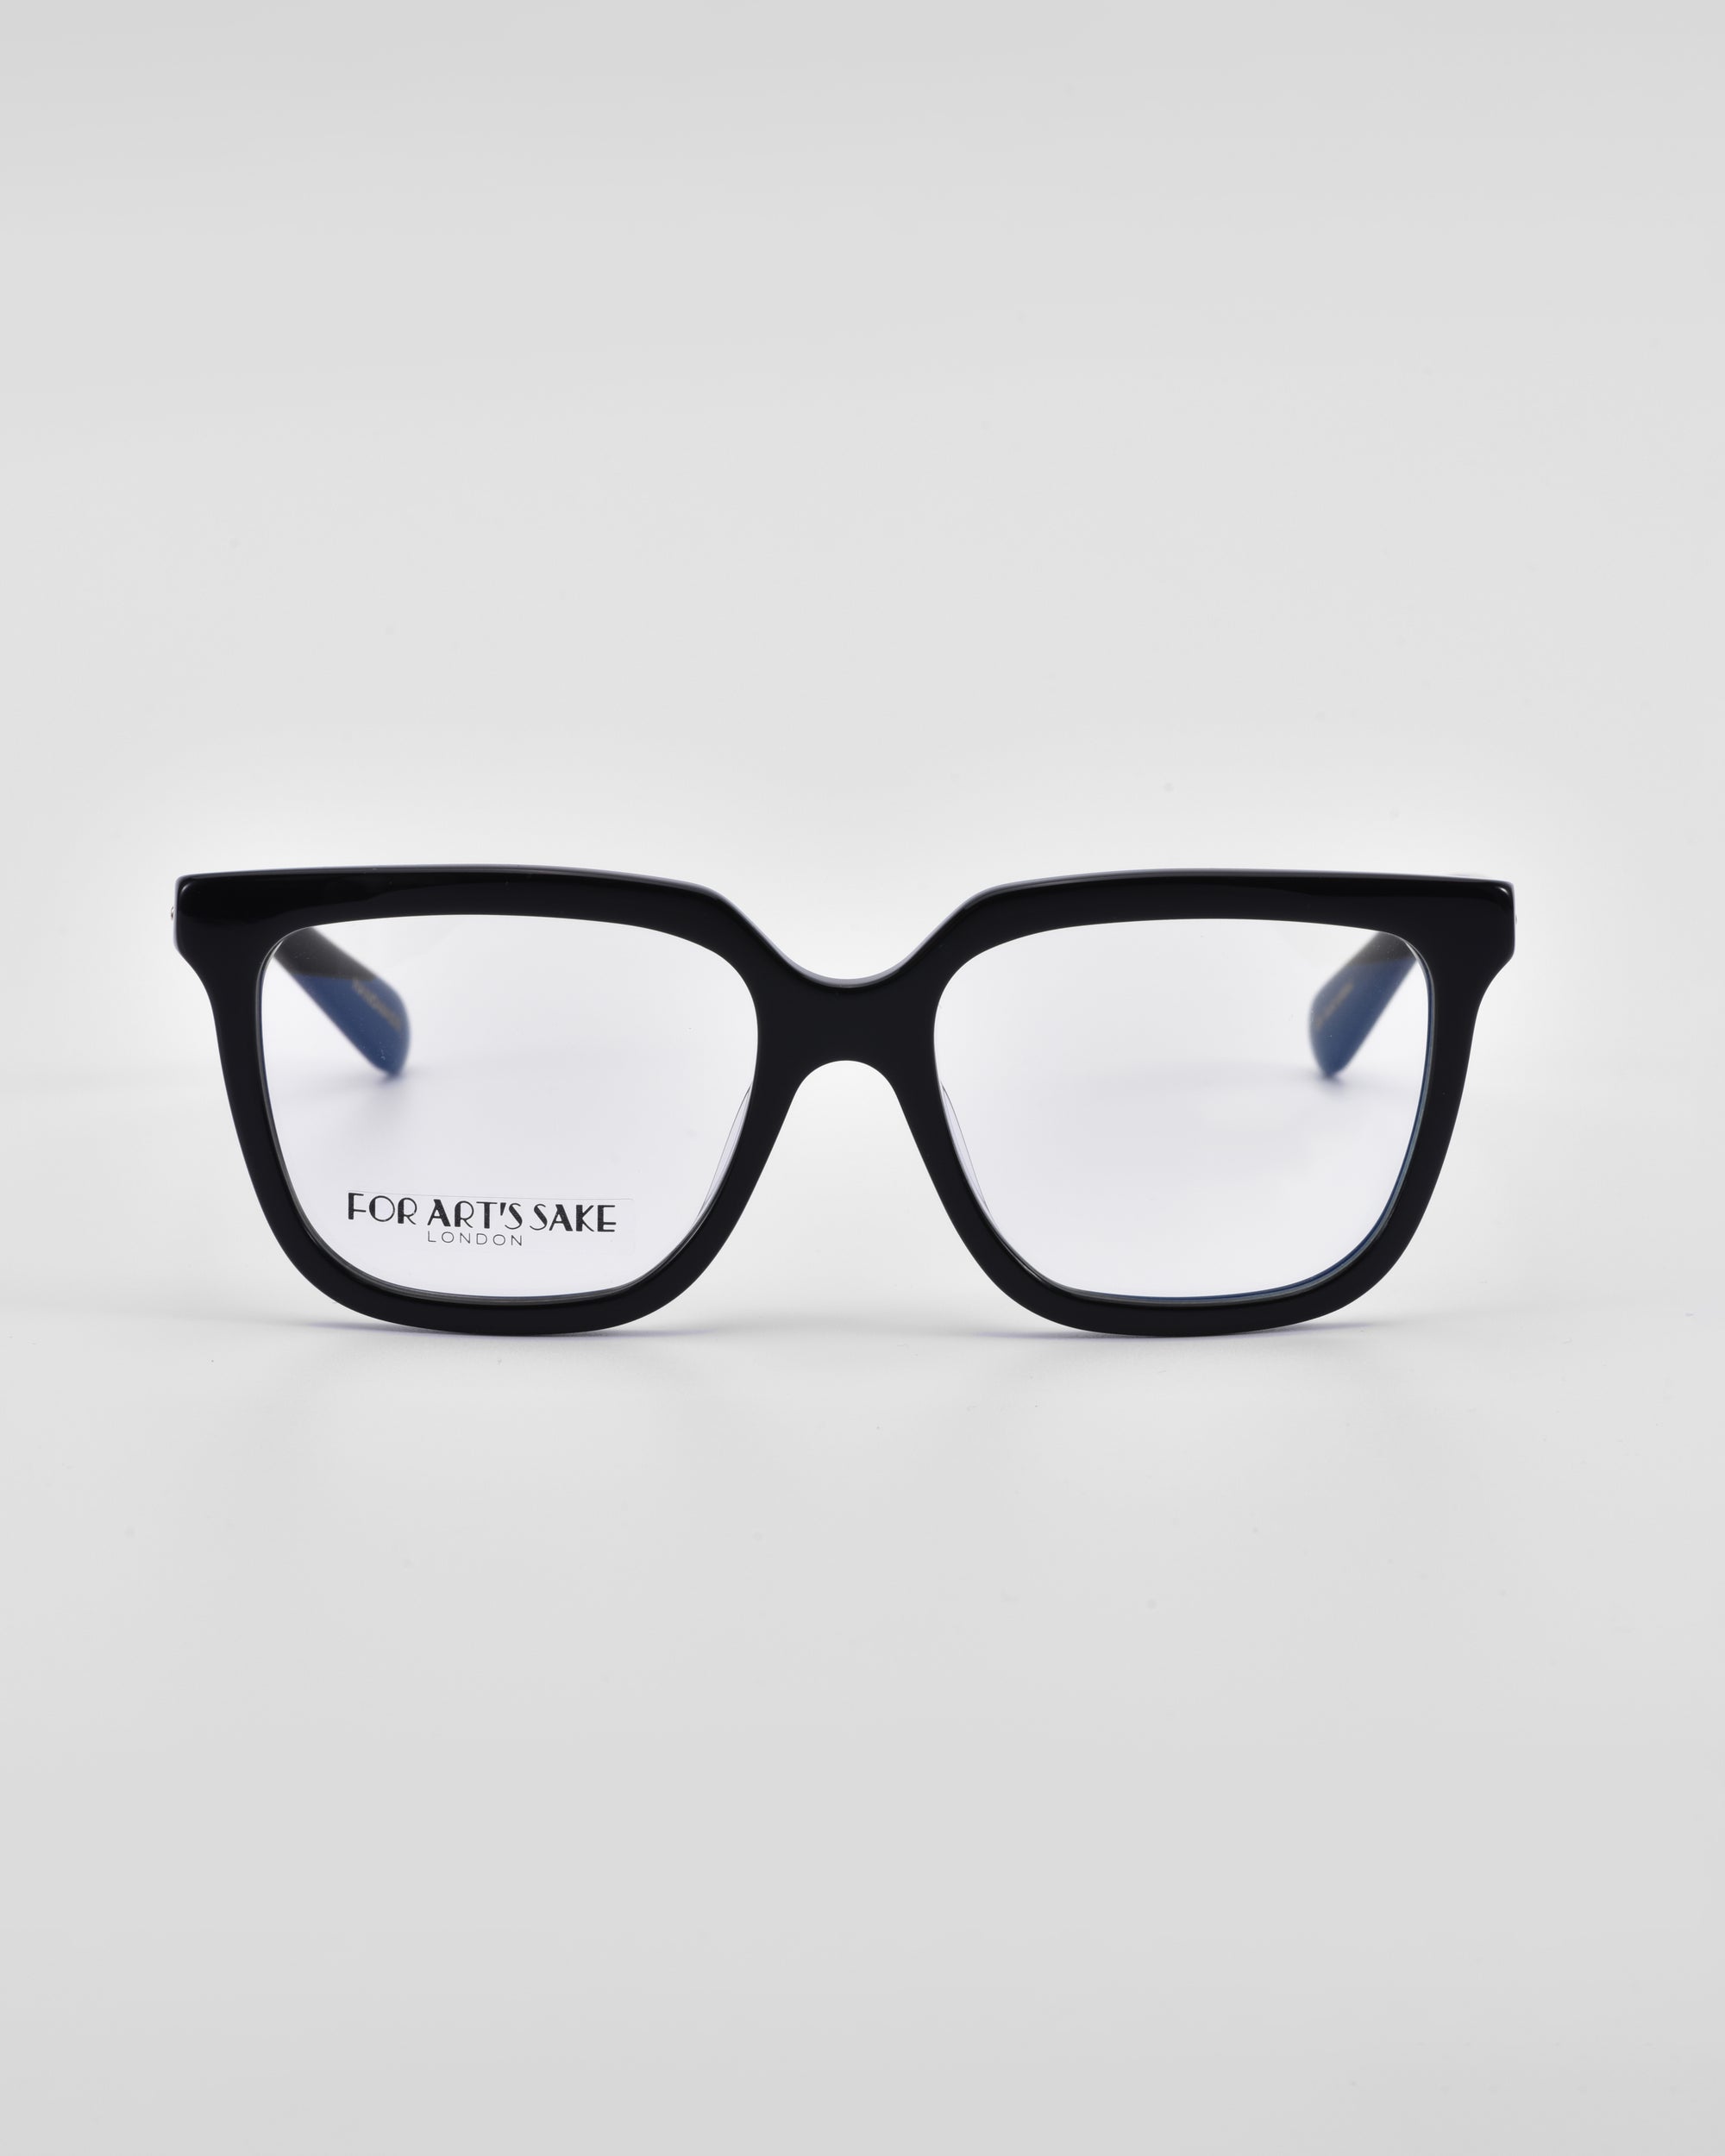 A pair of black-framed eyeglasses with a slightly rectangular, classic square silhouette. The lenses are clear, and the left lens has the text "Nina" and "For Art's Sake®" printed in black in the lower corner. The background is plain white.